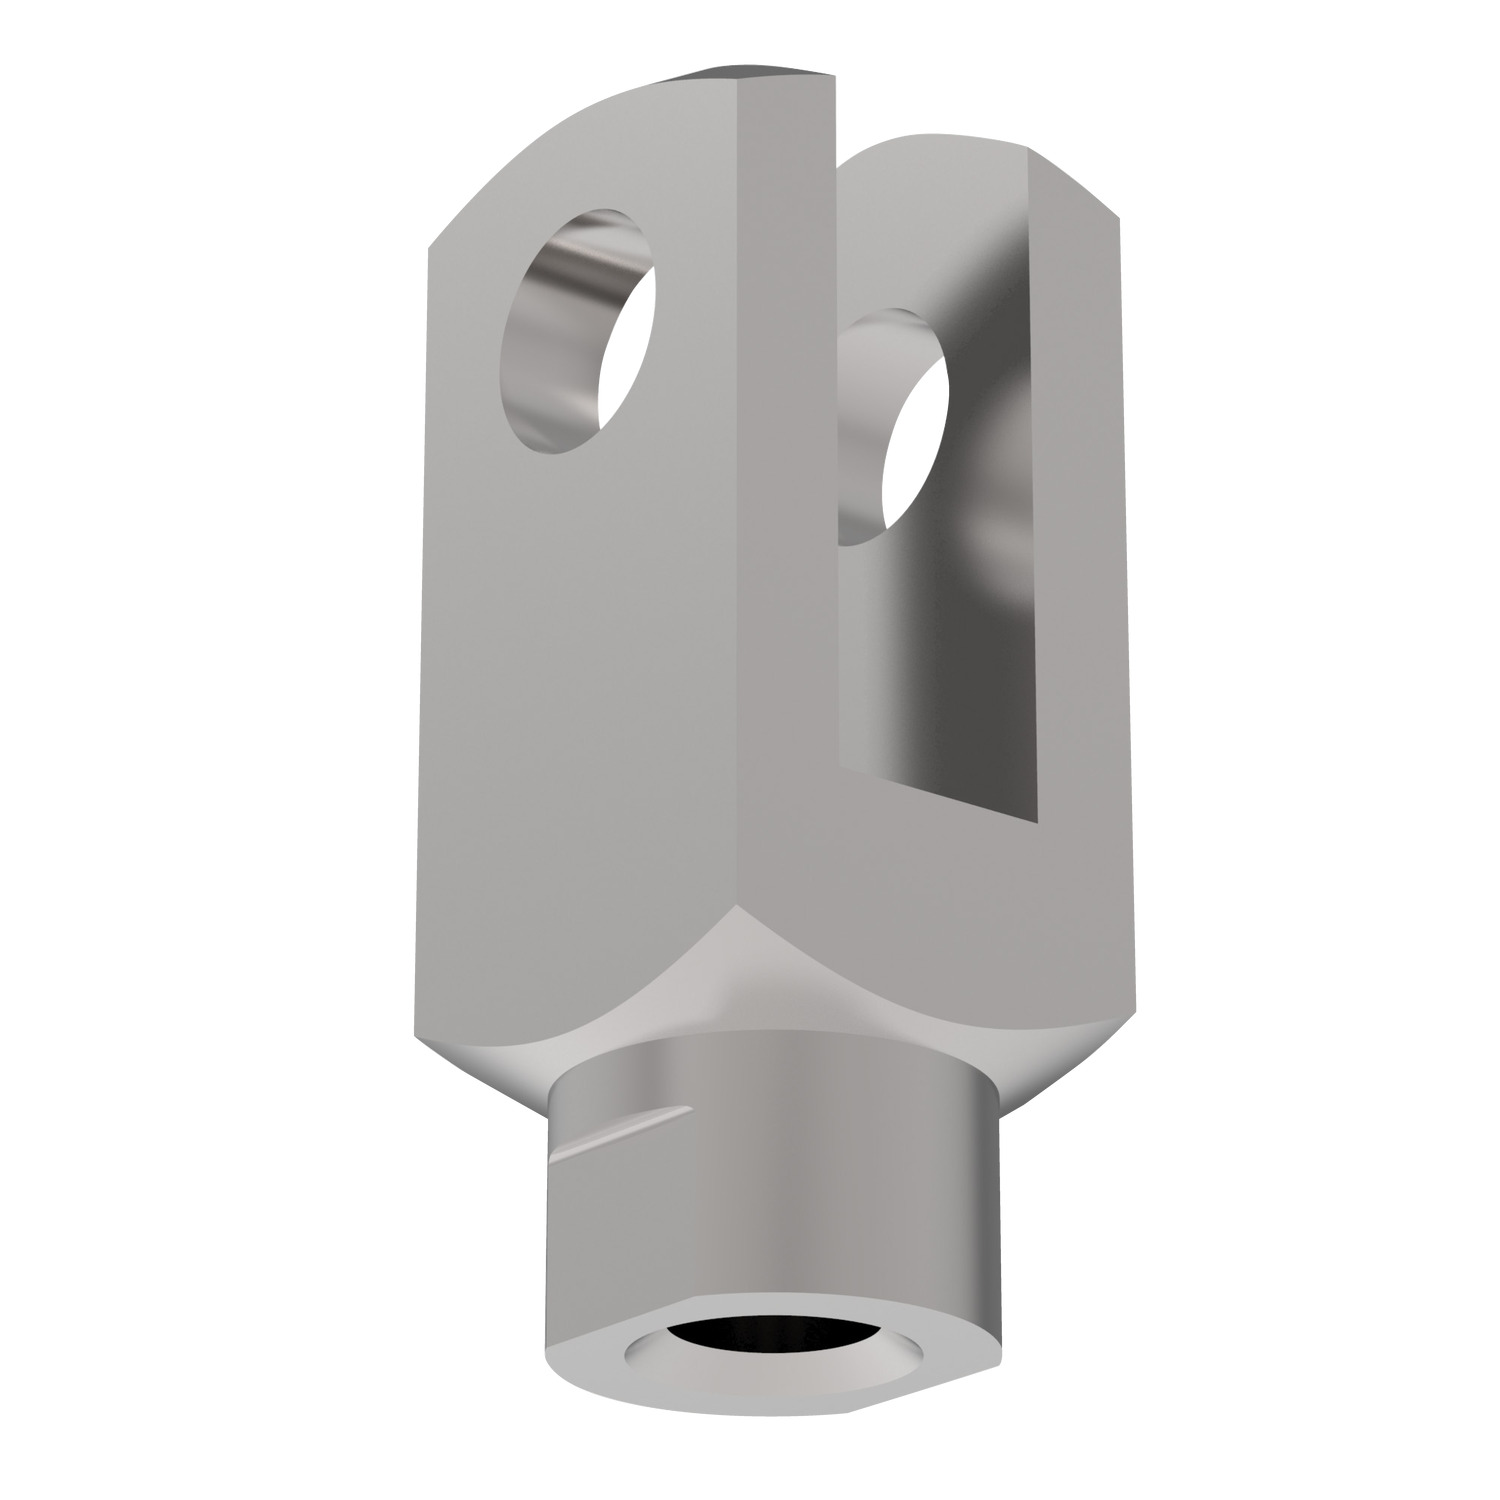 R3430 - Rotating Clevis Joint